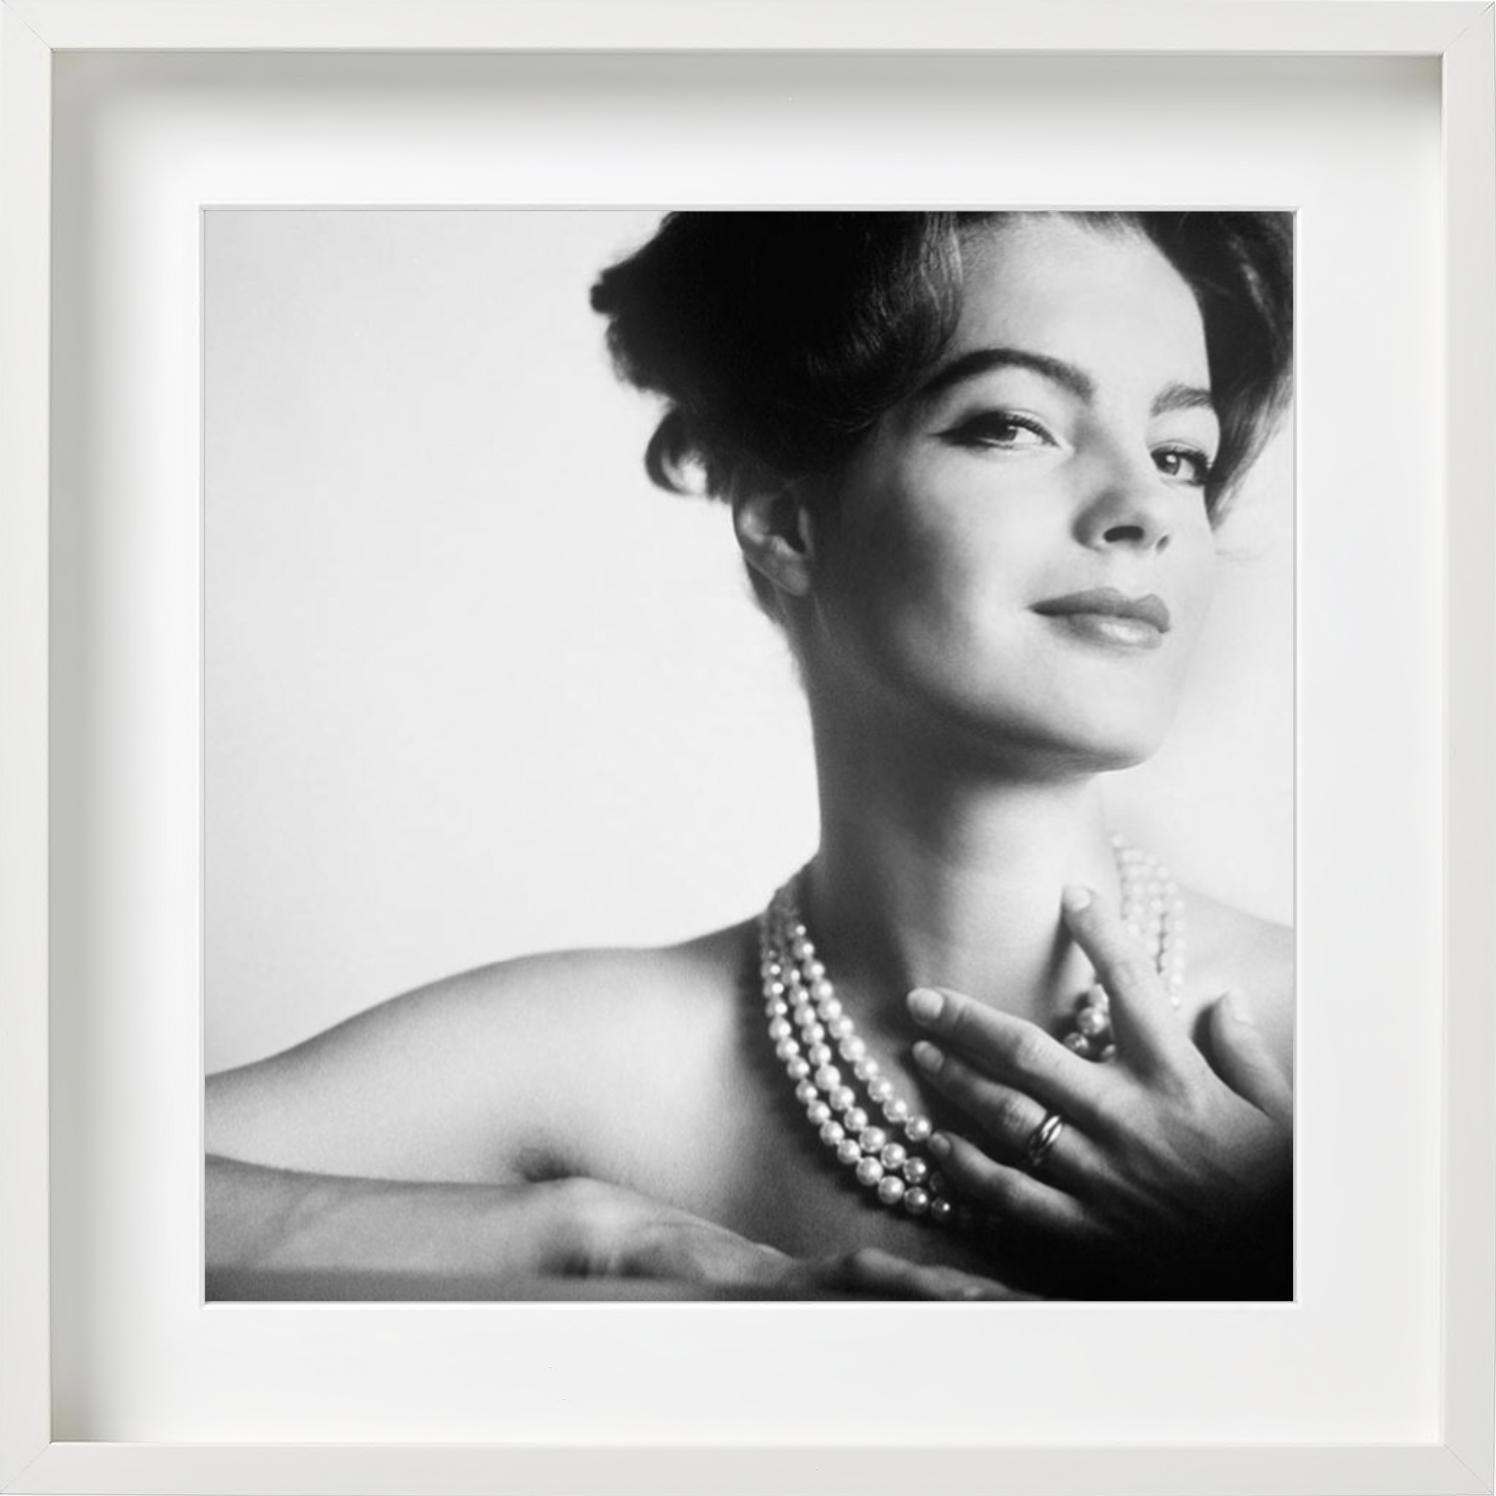 All prints are limited edition. Available in multiple sizes. High-end framing on request.

All prints are done and signed by the artist. The collector receives an additional certificate of authenticity from the gallery.

Romy Schneider is not only